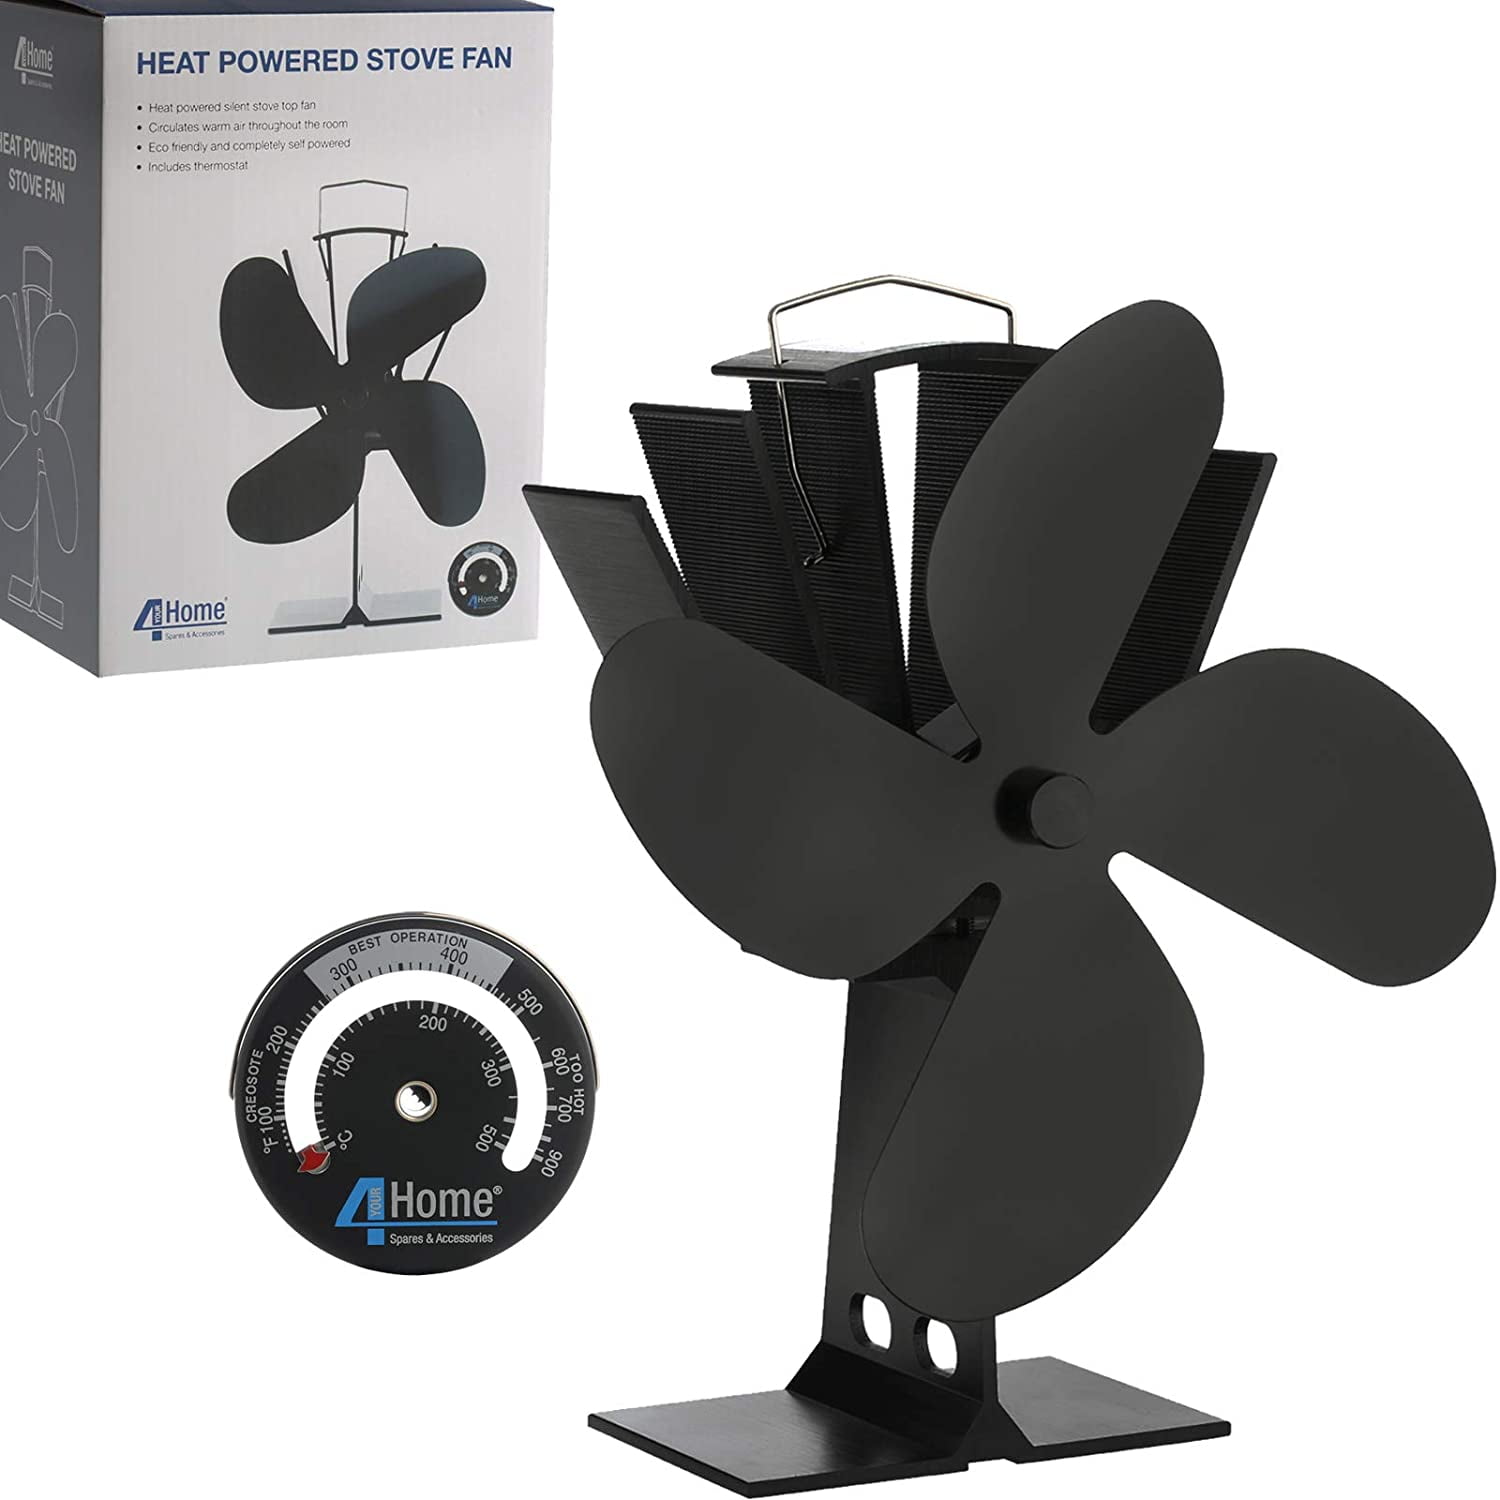 EcoFlow 2020 Model Mini Heat Powered Stove Fan With Free Magnetic Thermometer 